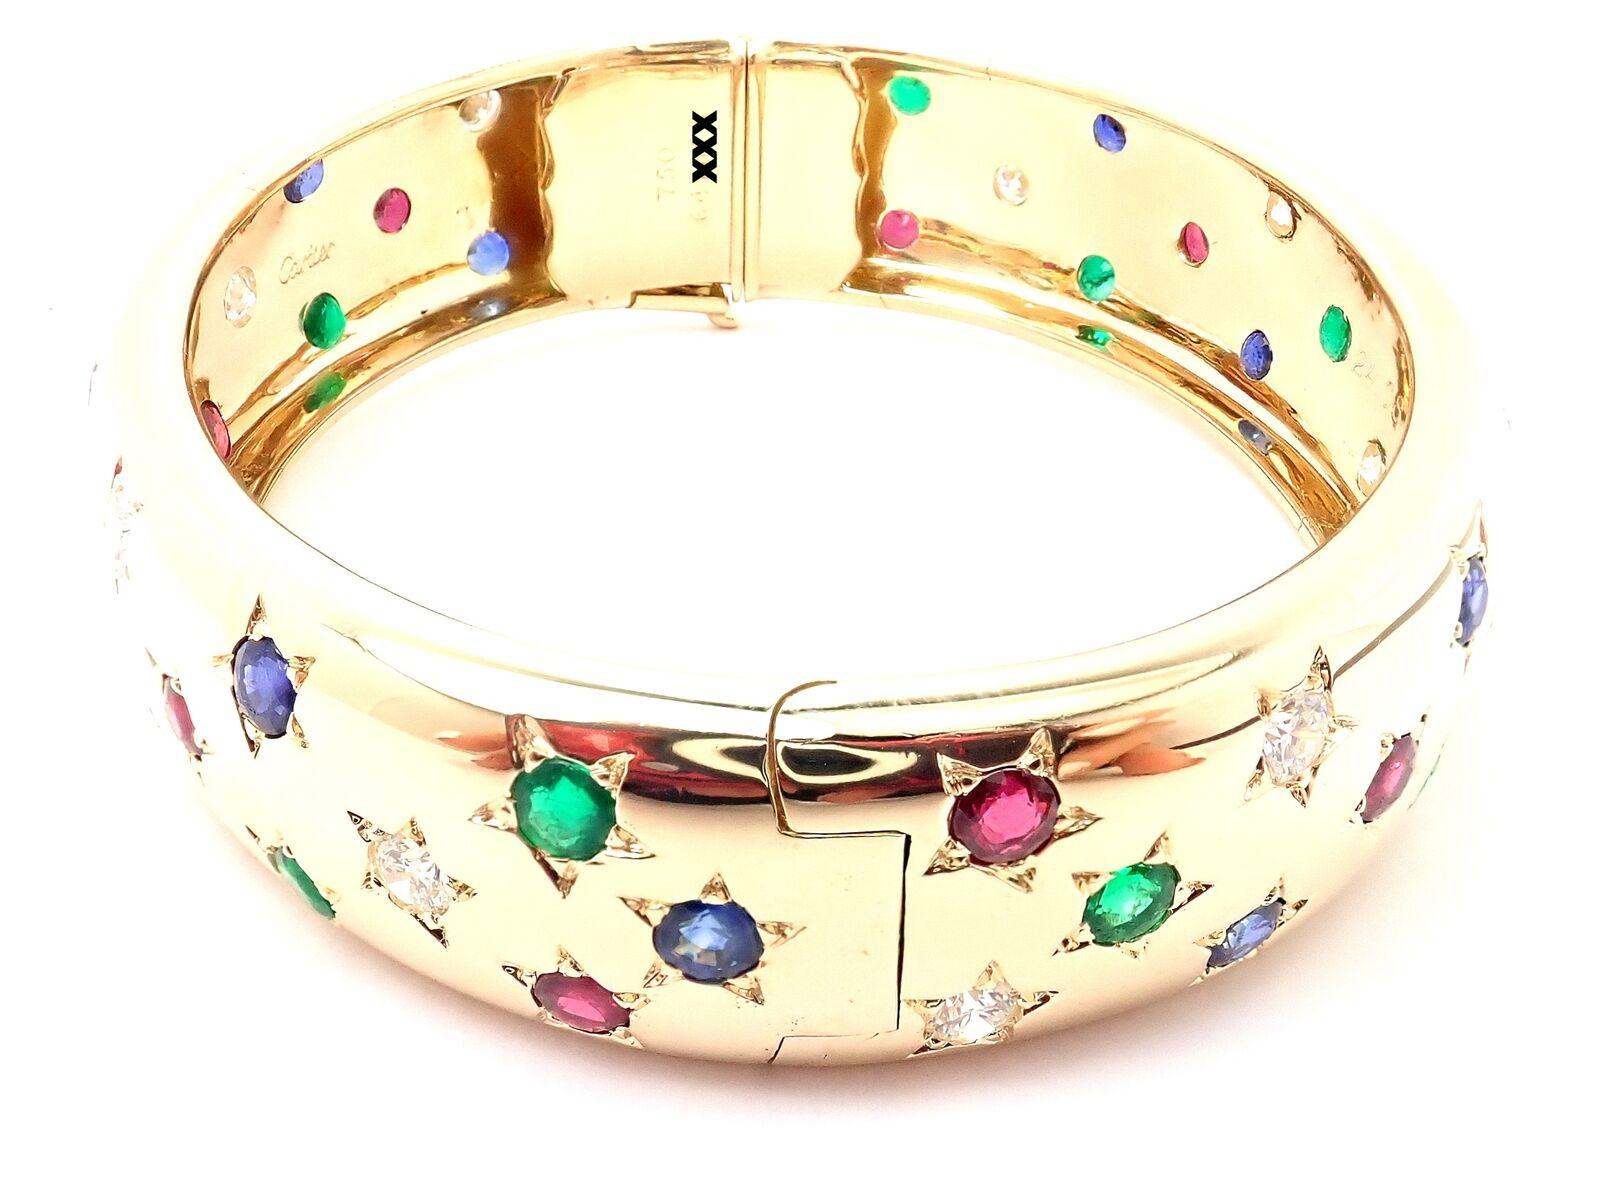 Cartier Star Diamond Ruby Emerald Sapphire Yellow Gold Bangle Bracelet In Excellent Condition For Sale In Holland, PA